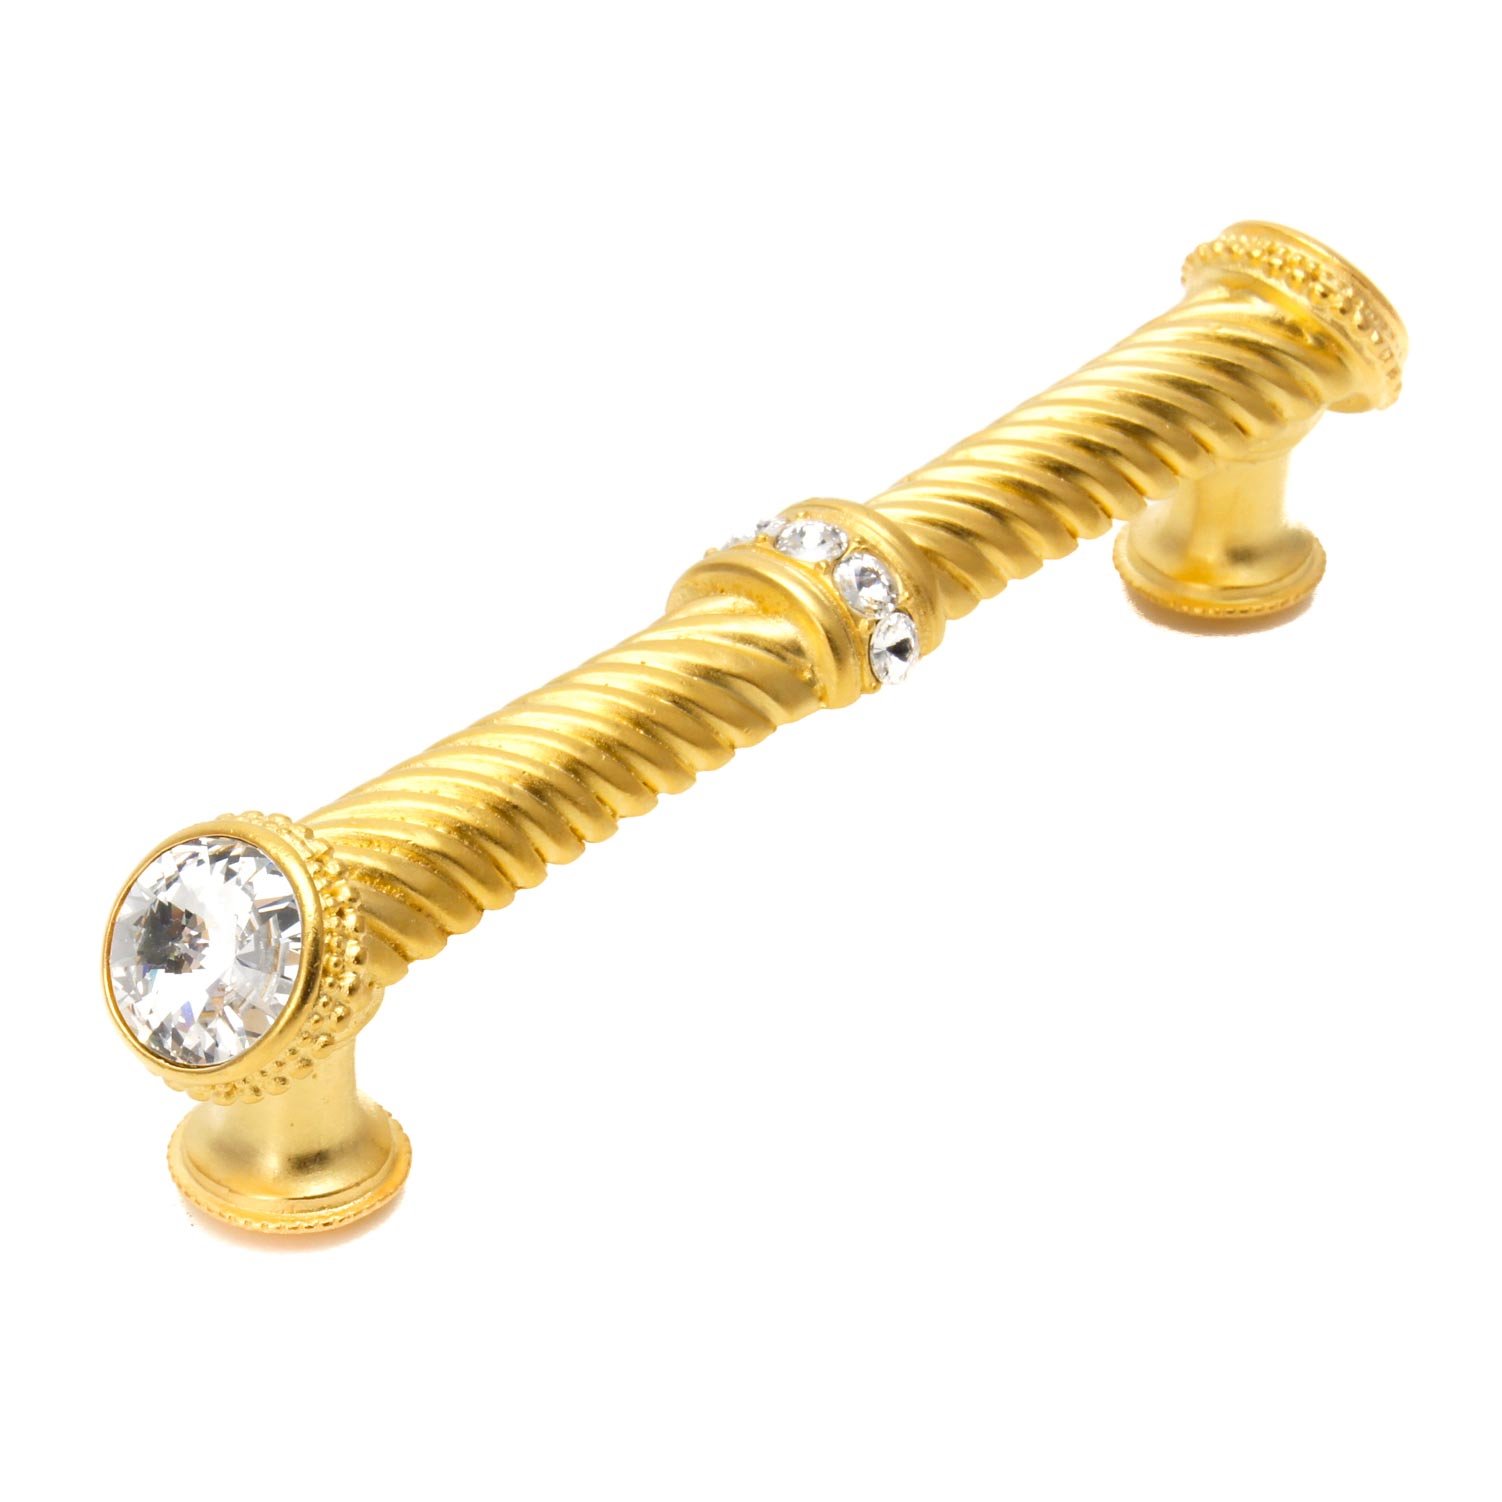 Caché 5" Centers Large Pull With End & Center Swarovski Crystals in Soft Gold with Vitrail Light